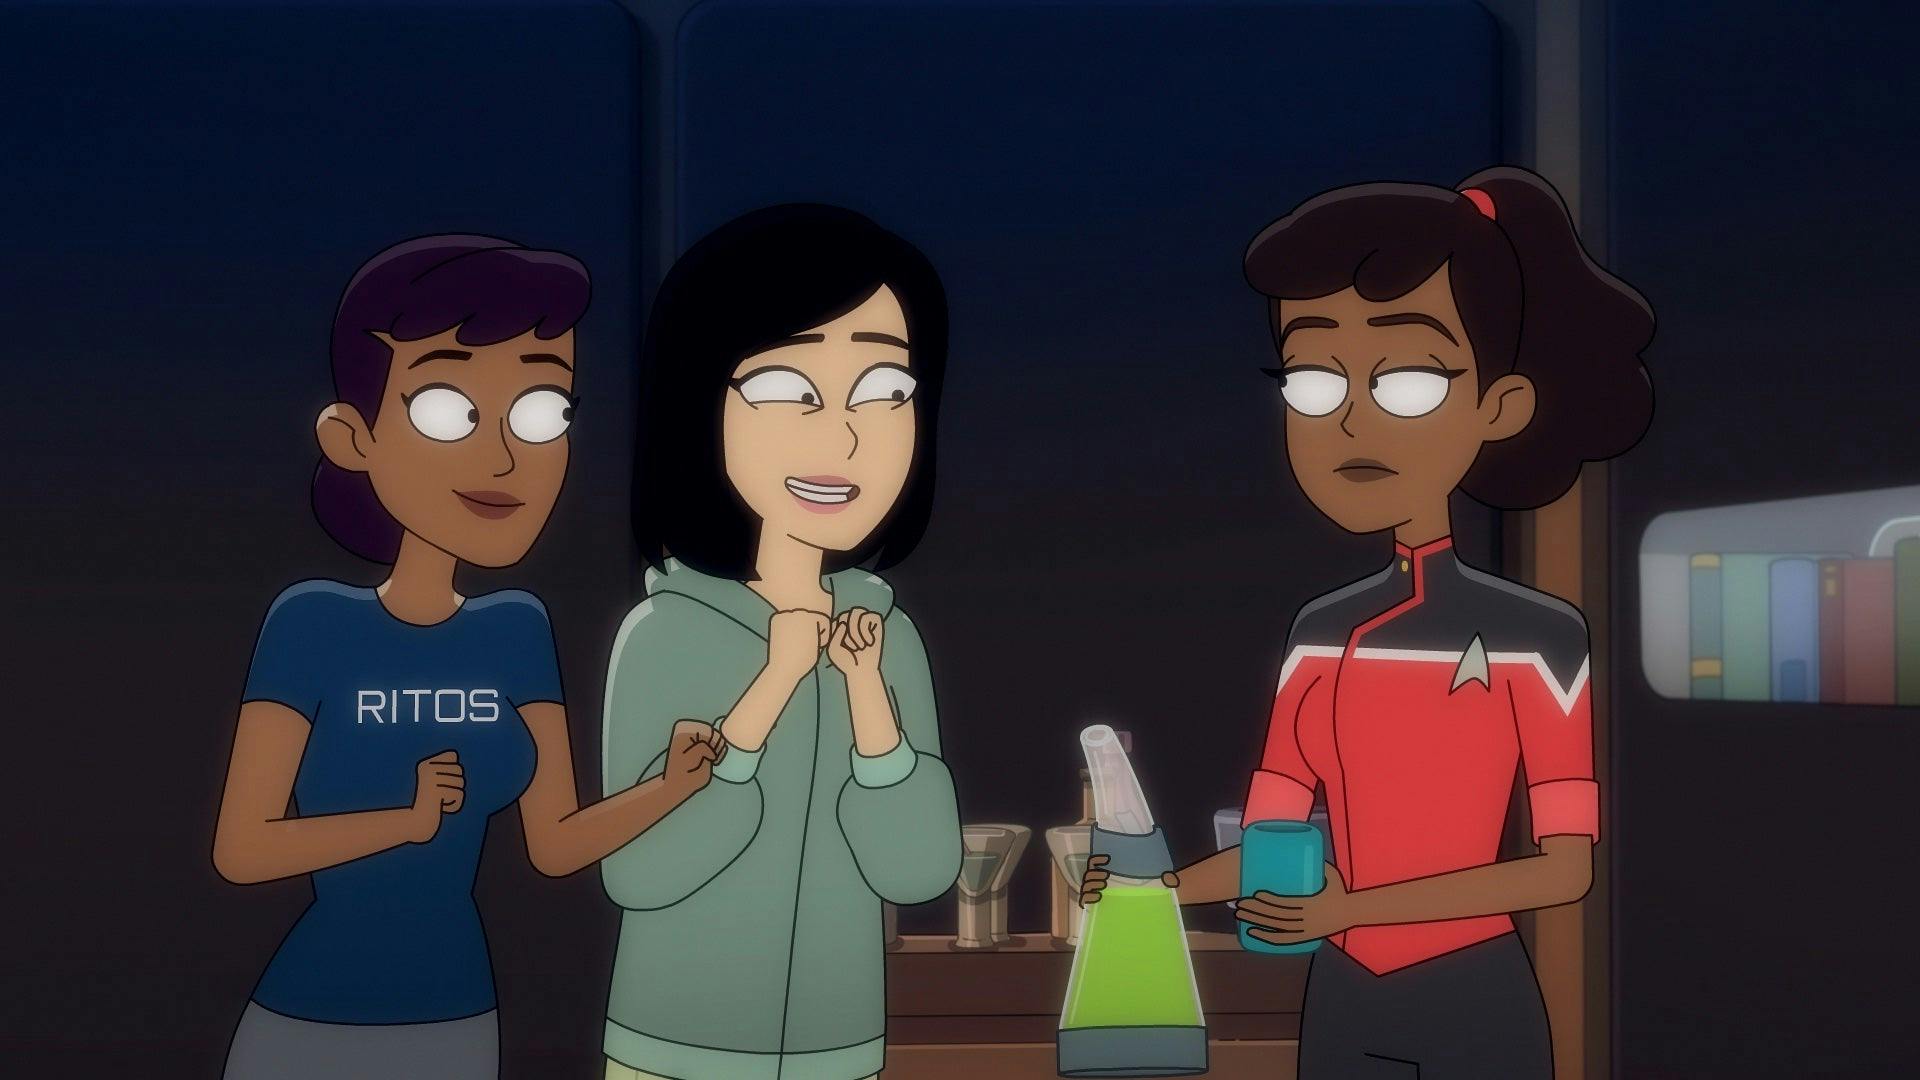 Two of Jennifer's friends talk excitedly to Mariner, who is holding a bottle of alcohol.